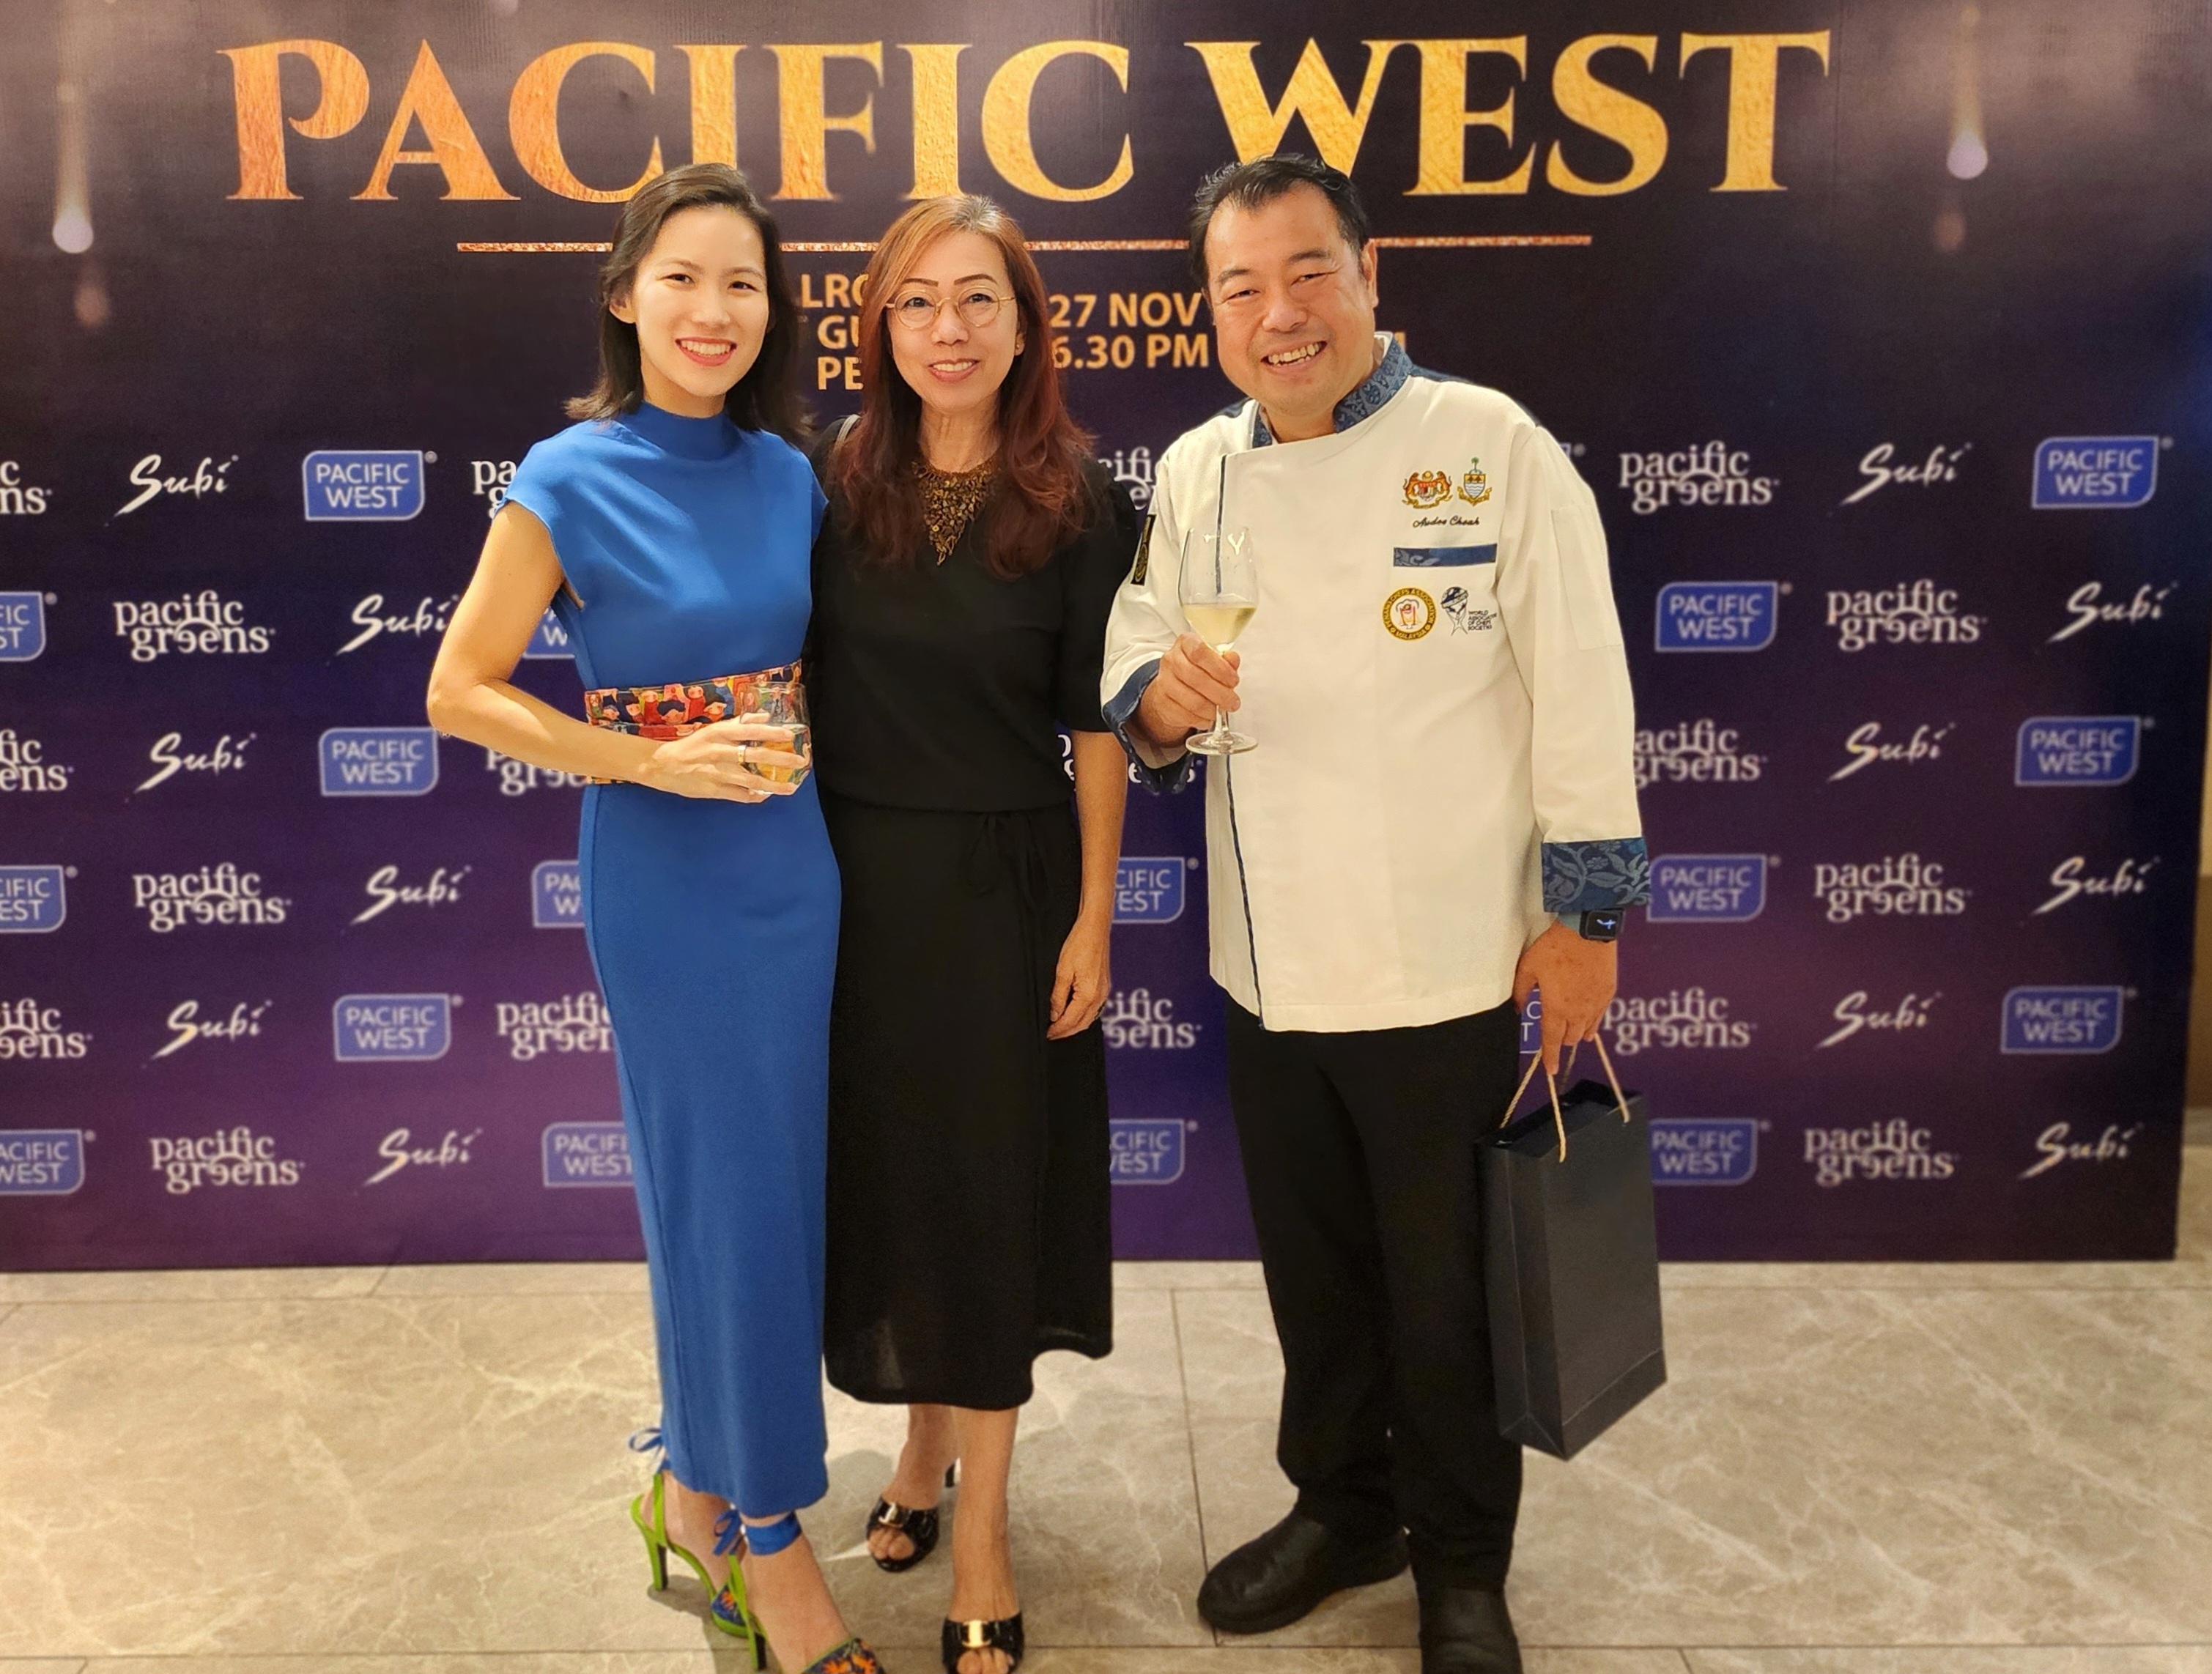 Pacific West Cultivating New Convenient Products